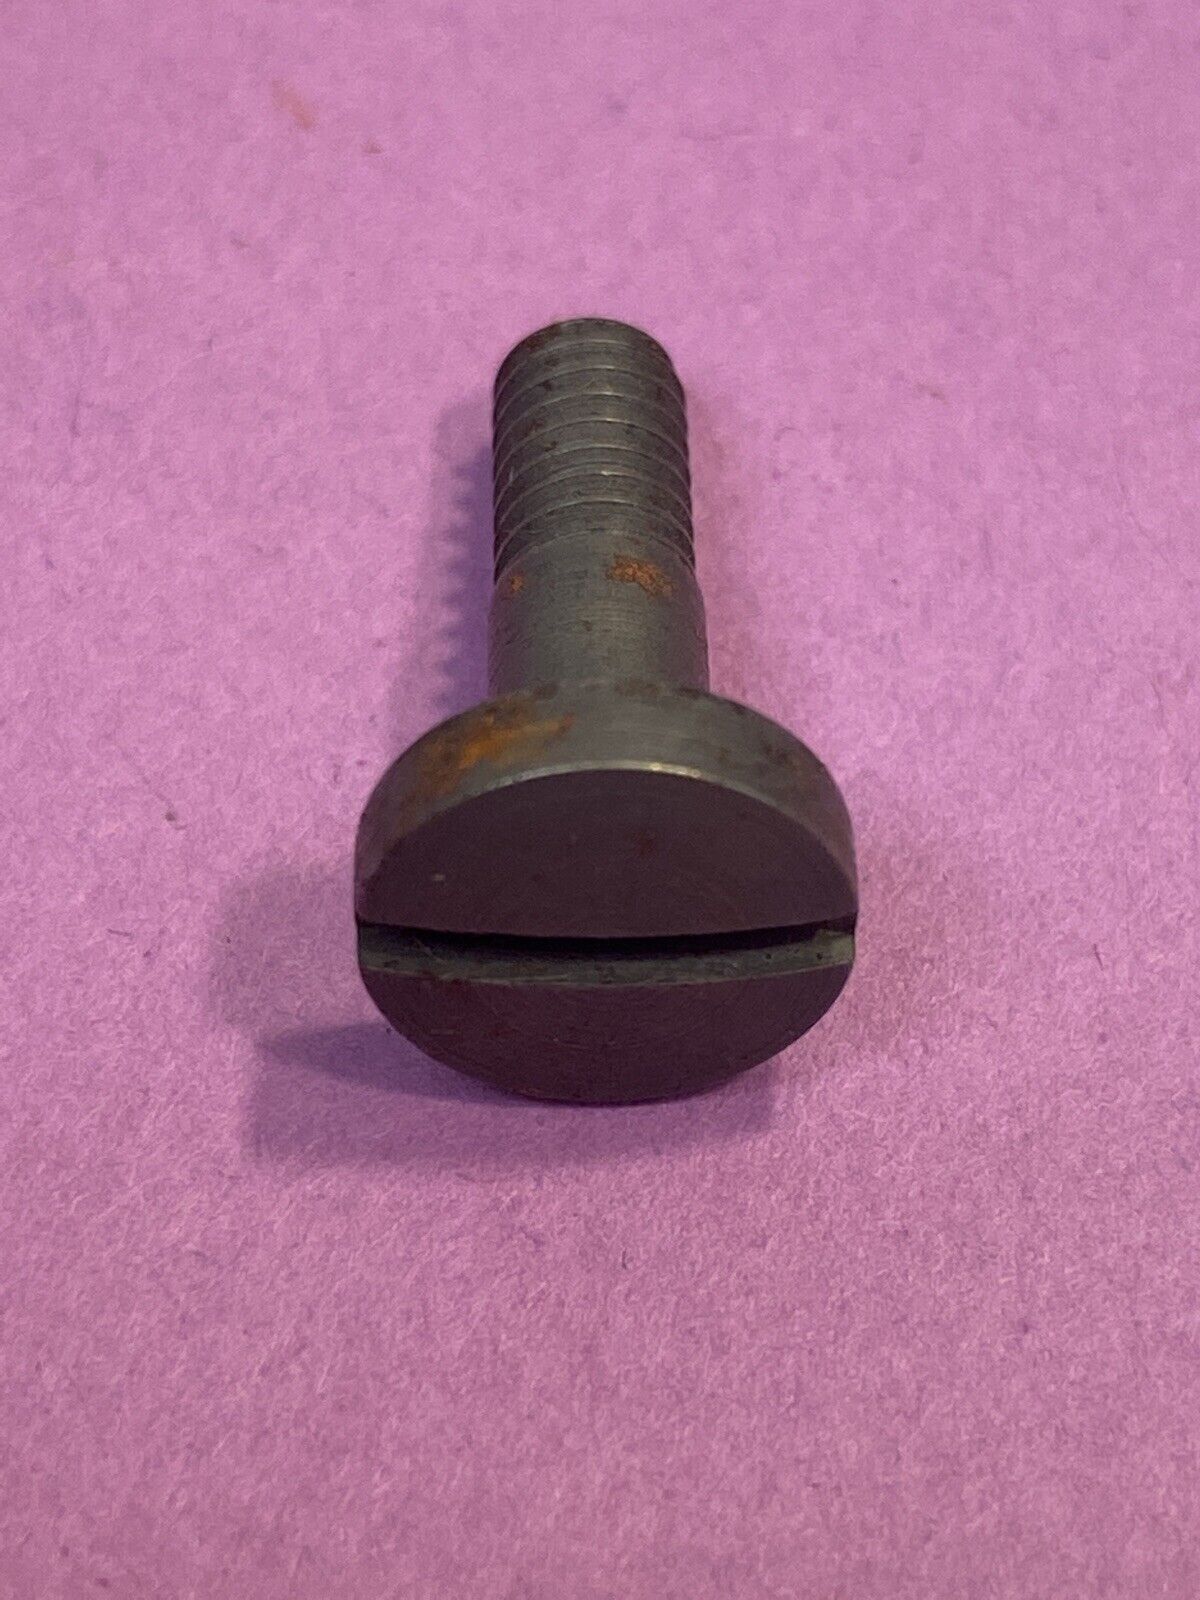 *NOS* 2058 SCREW FOR REECE SEWING MACHINE